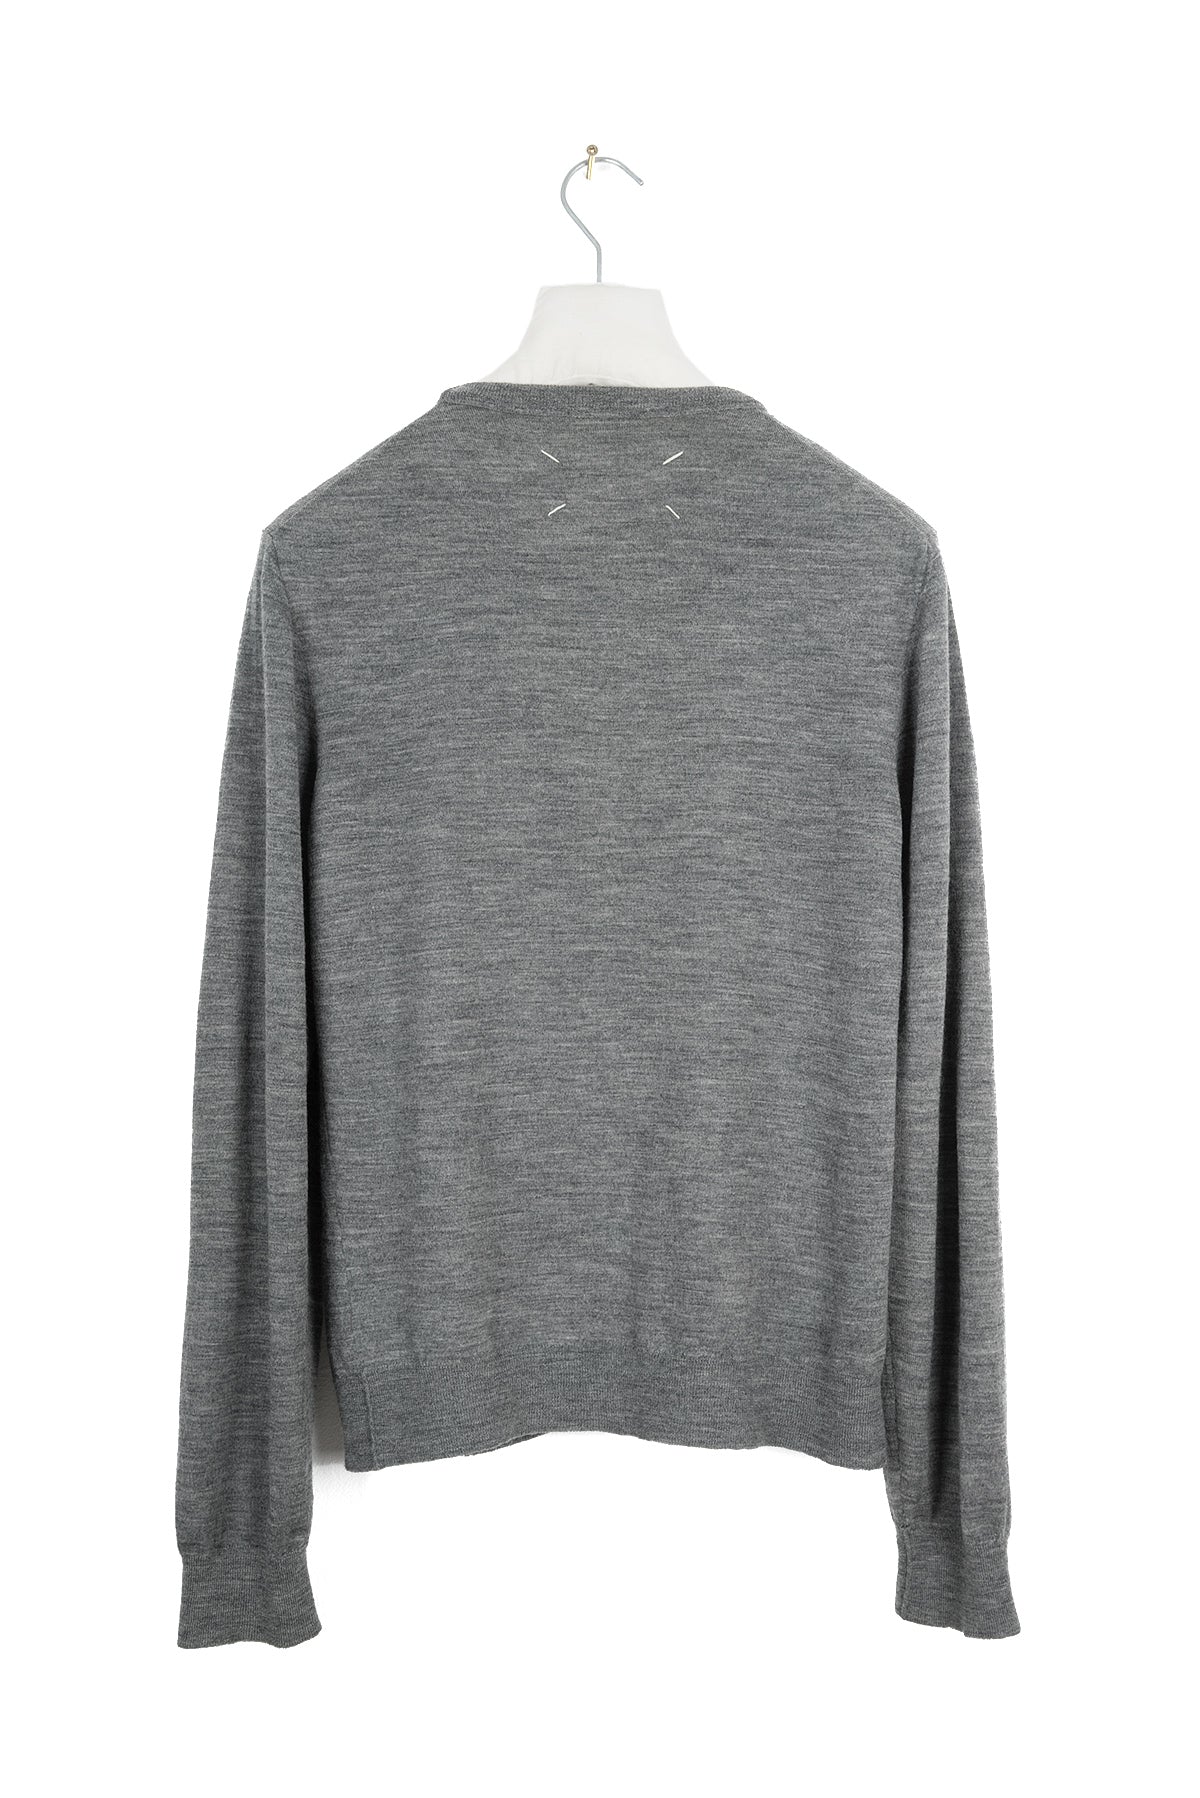 2003 A/W CREWNECK IN PURE WOOL BY MISS DEANNA